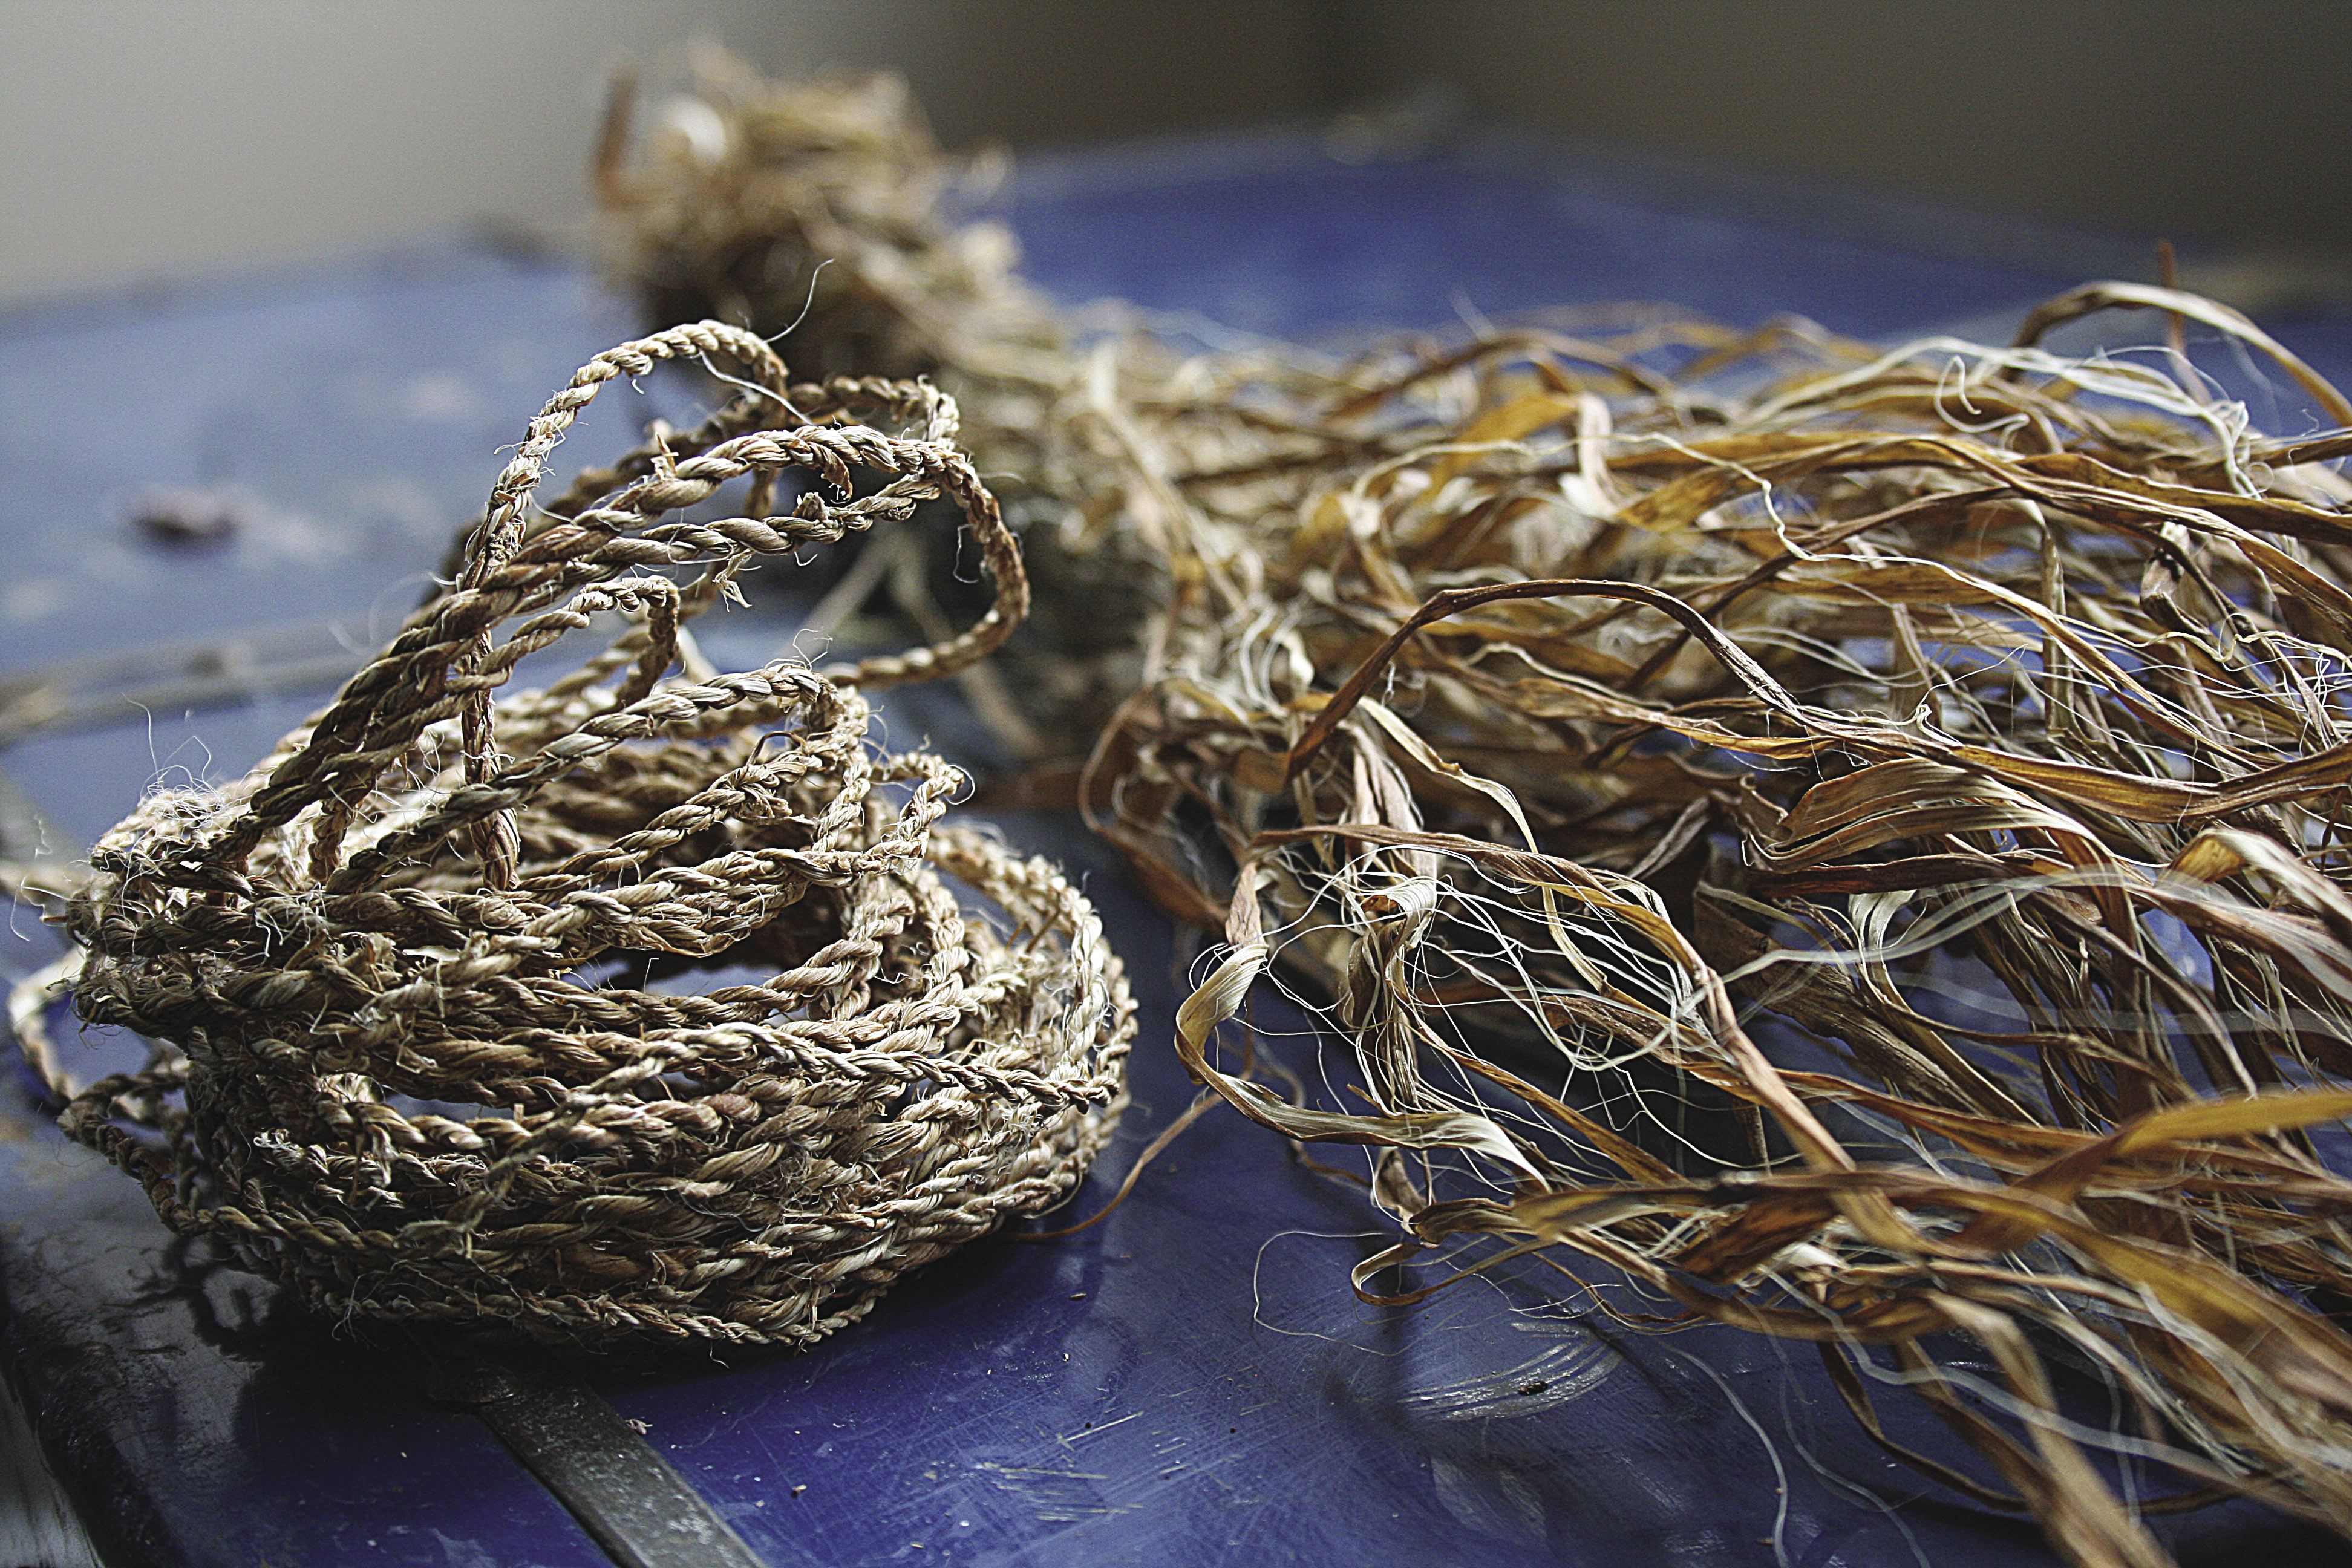 Rush cordage twined with cotton string. #twined baskets #basketry #fibres  #string #textiles #handmade